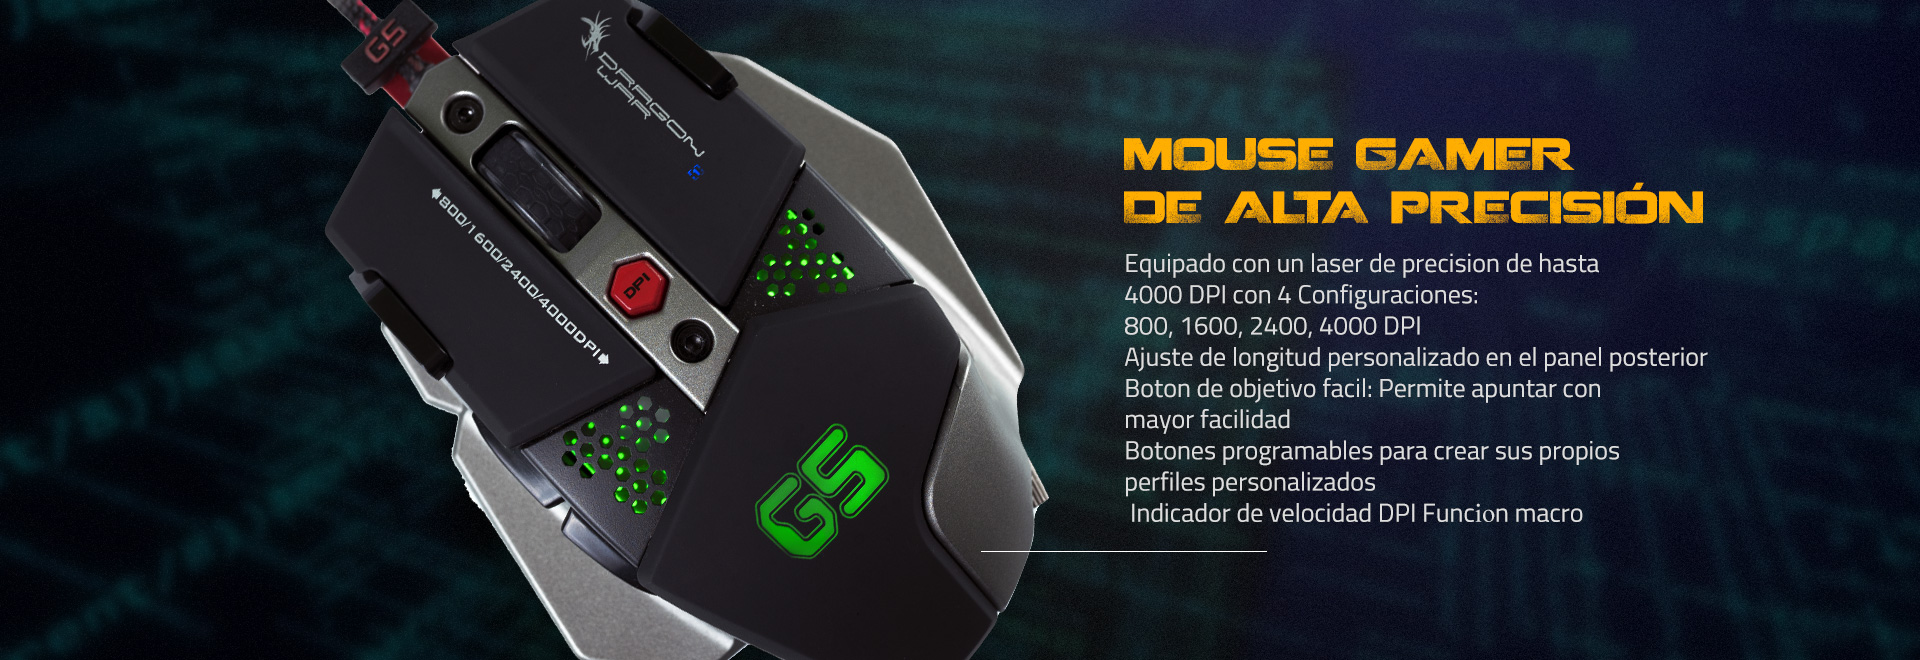 Warlord 4000dpi Gaming Mouse - Flyer: 1